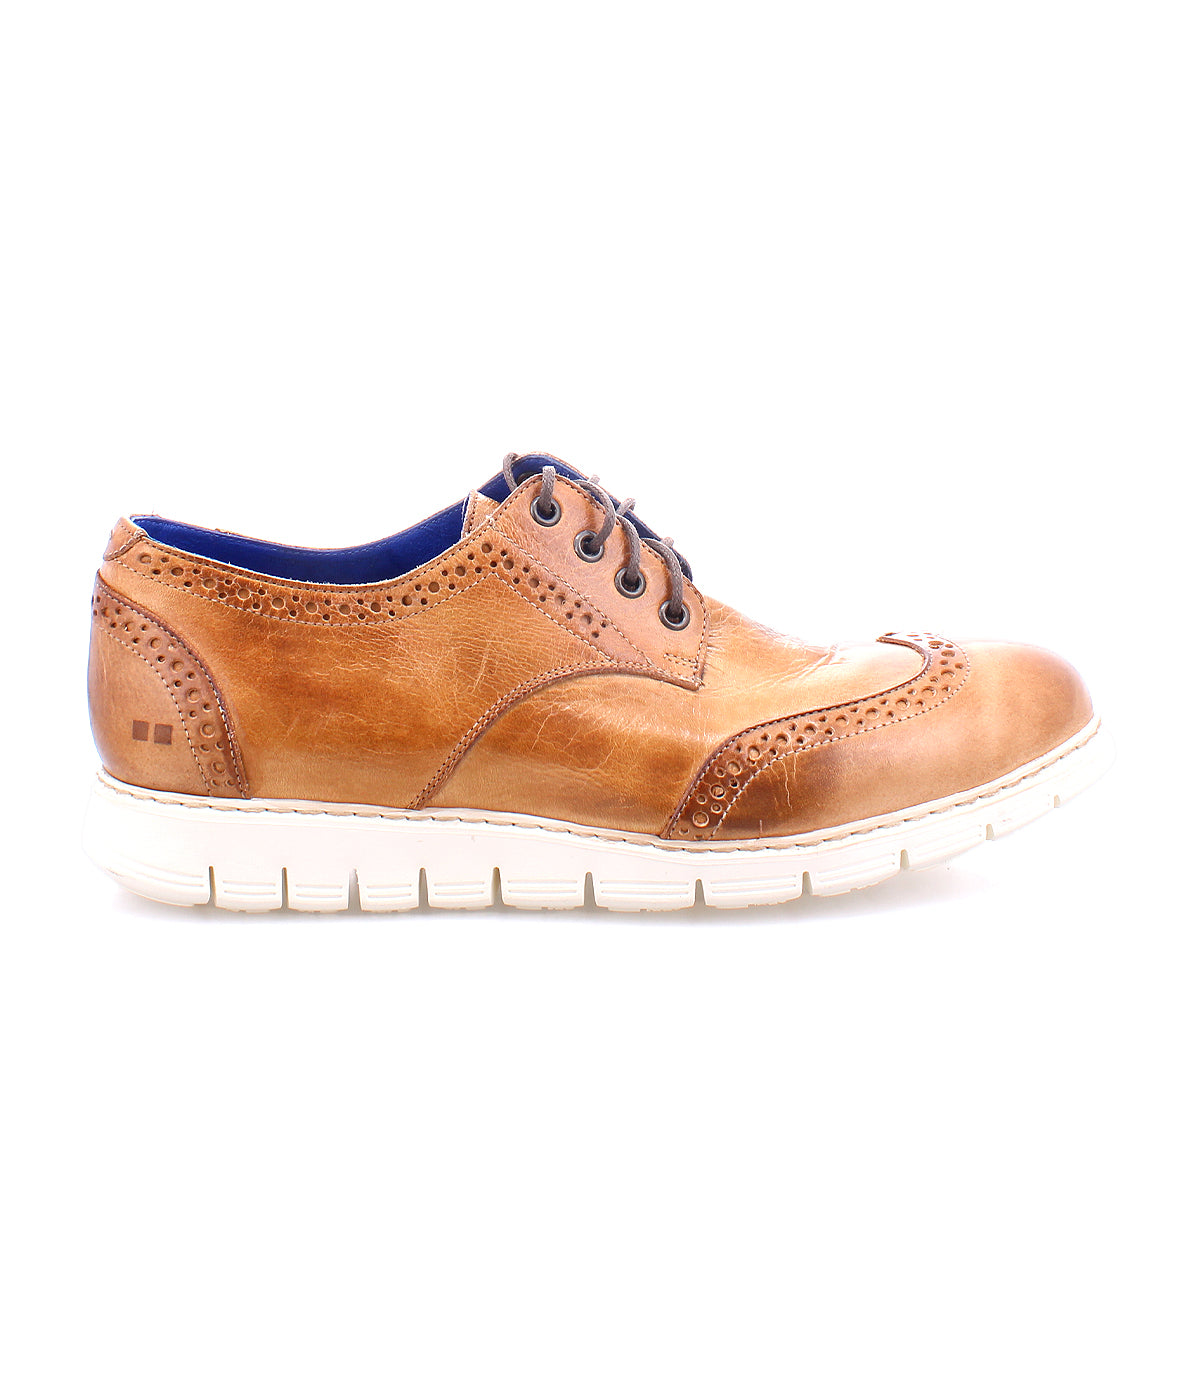 A lightweight leather Cayuga II wingtip derby shoe in brown with a white sole by Bed Stu.